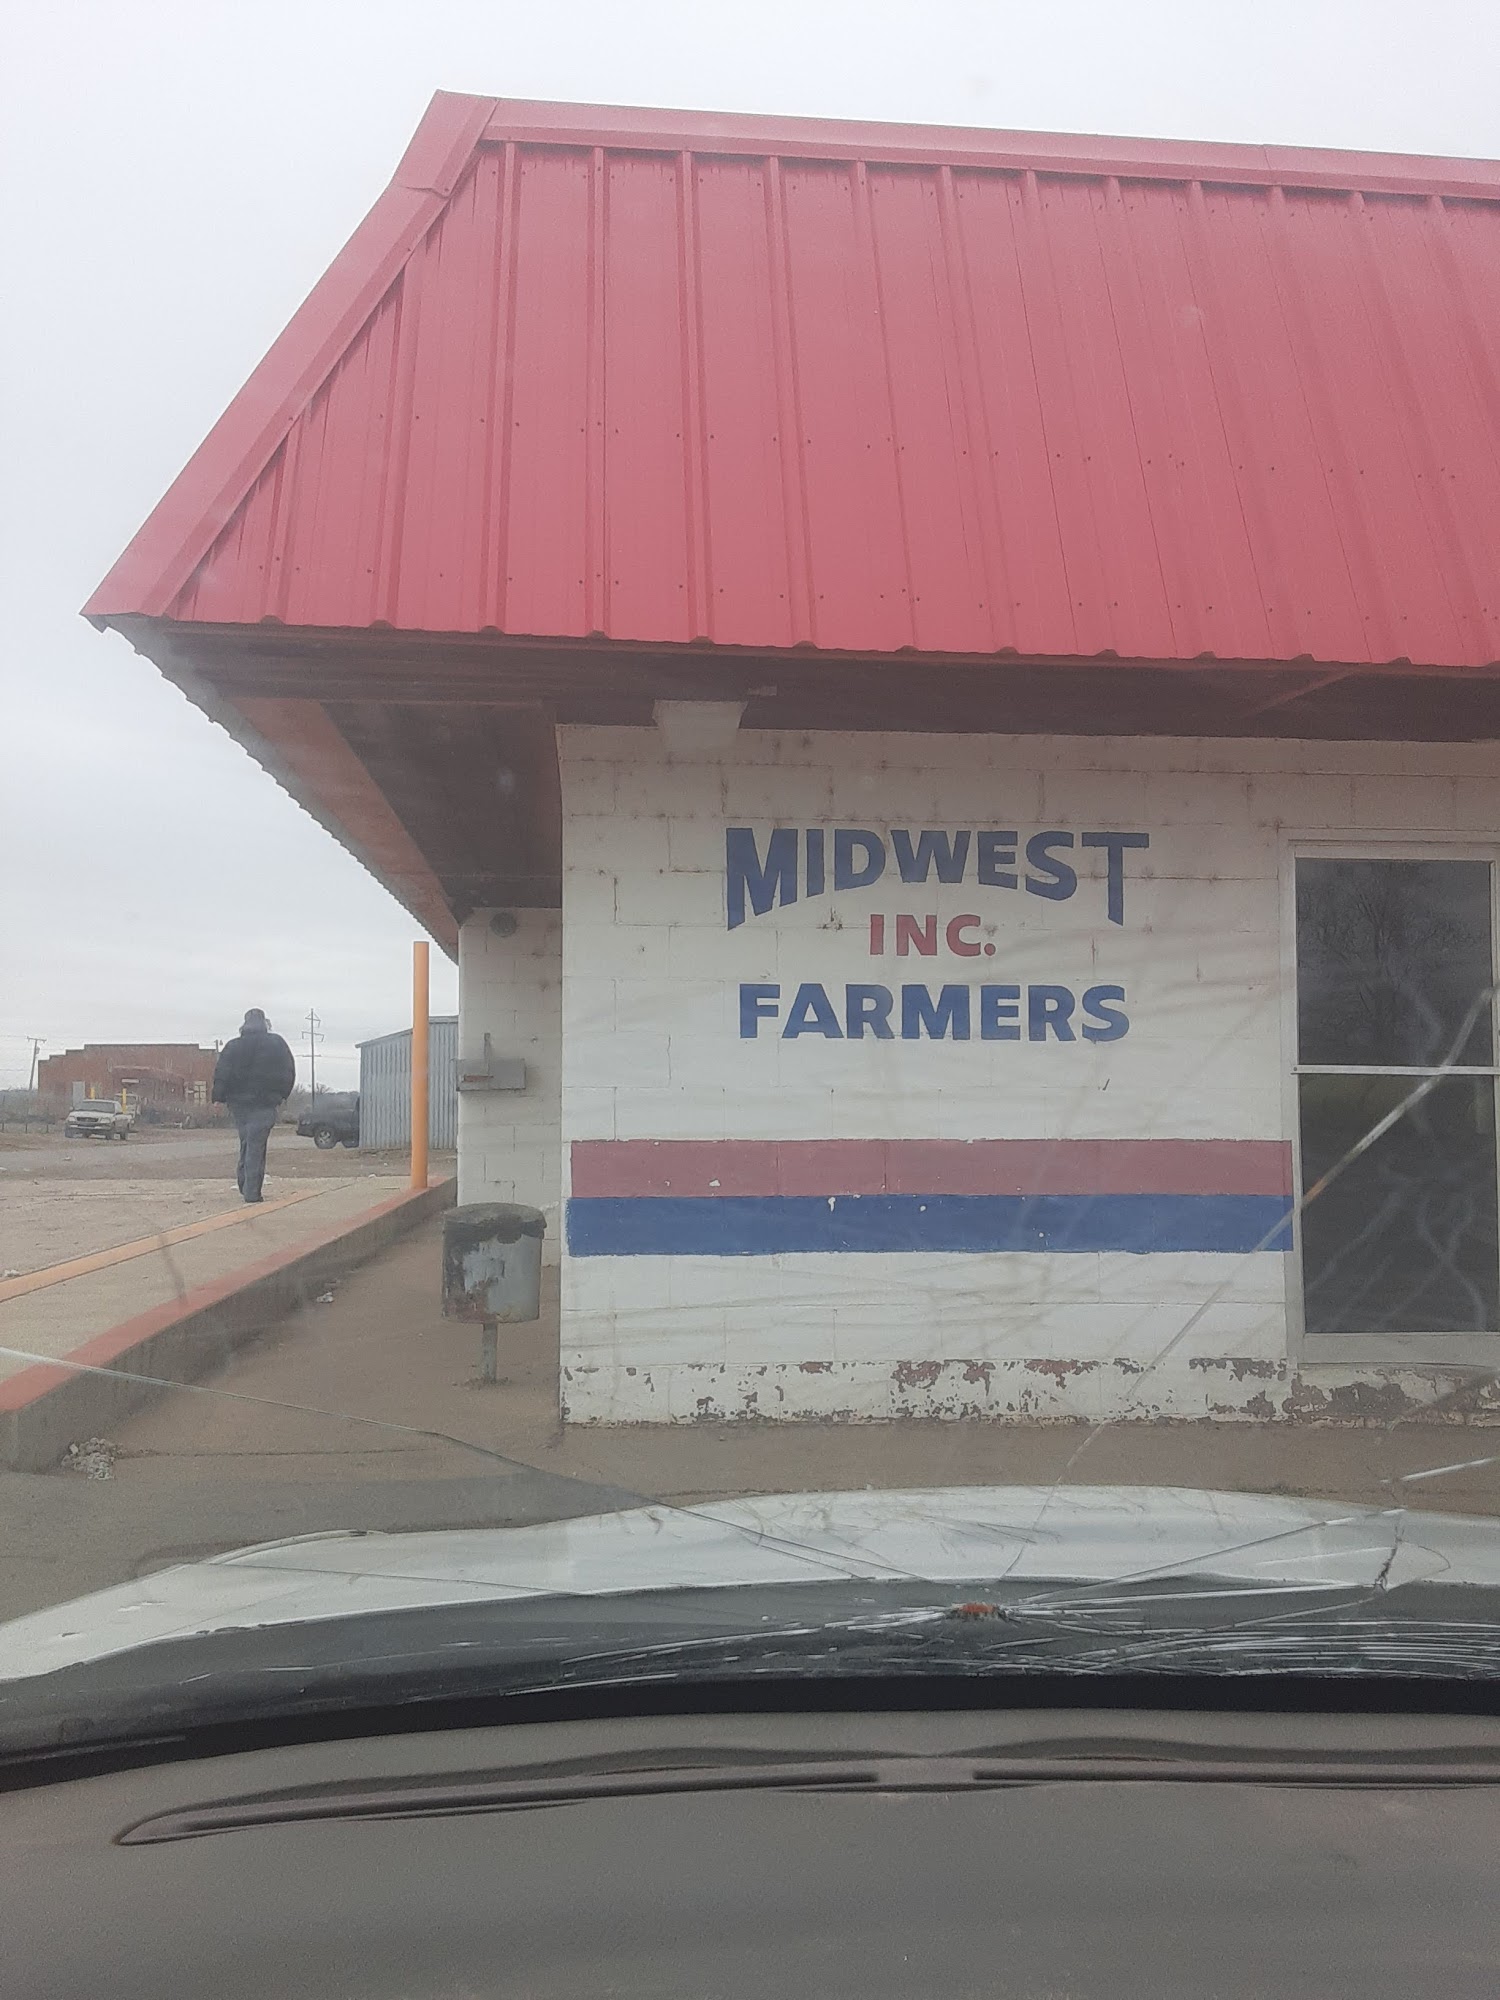 Midwest Farmers Inc